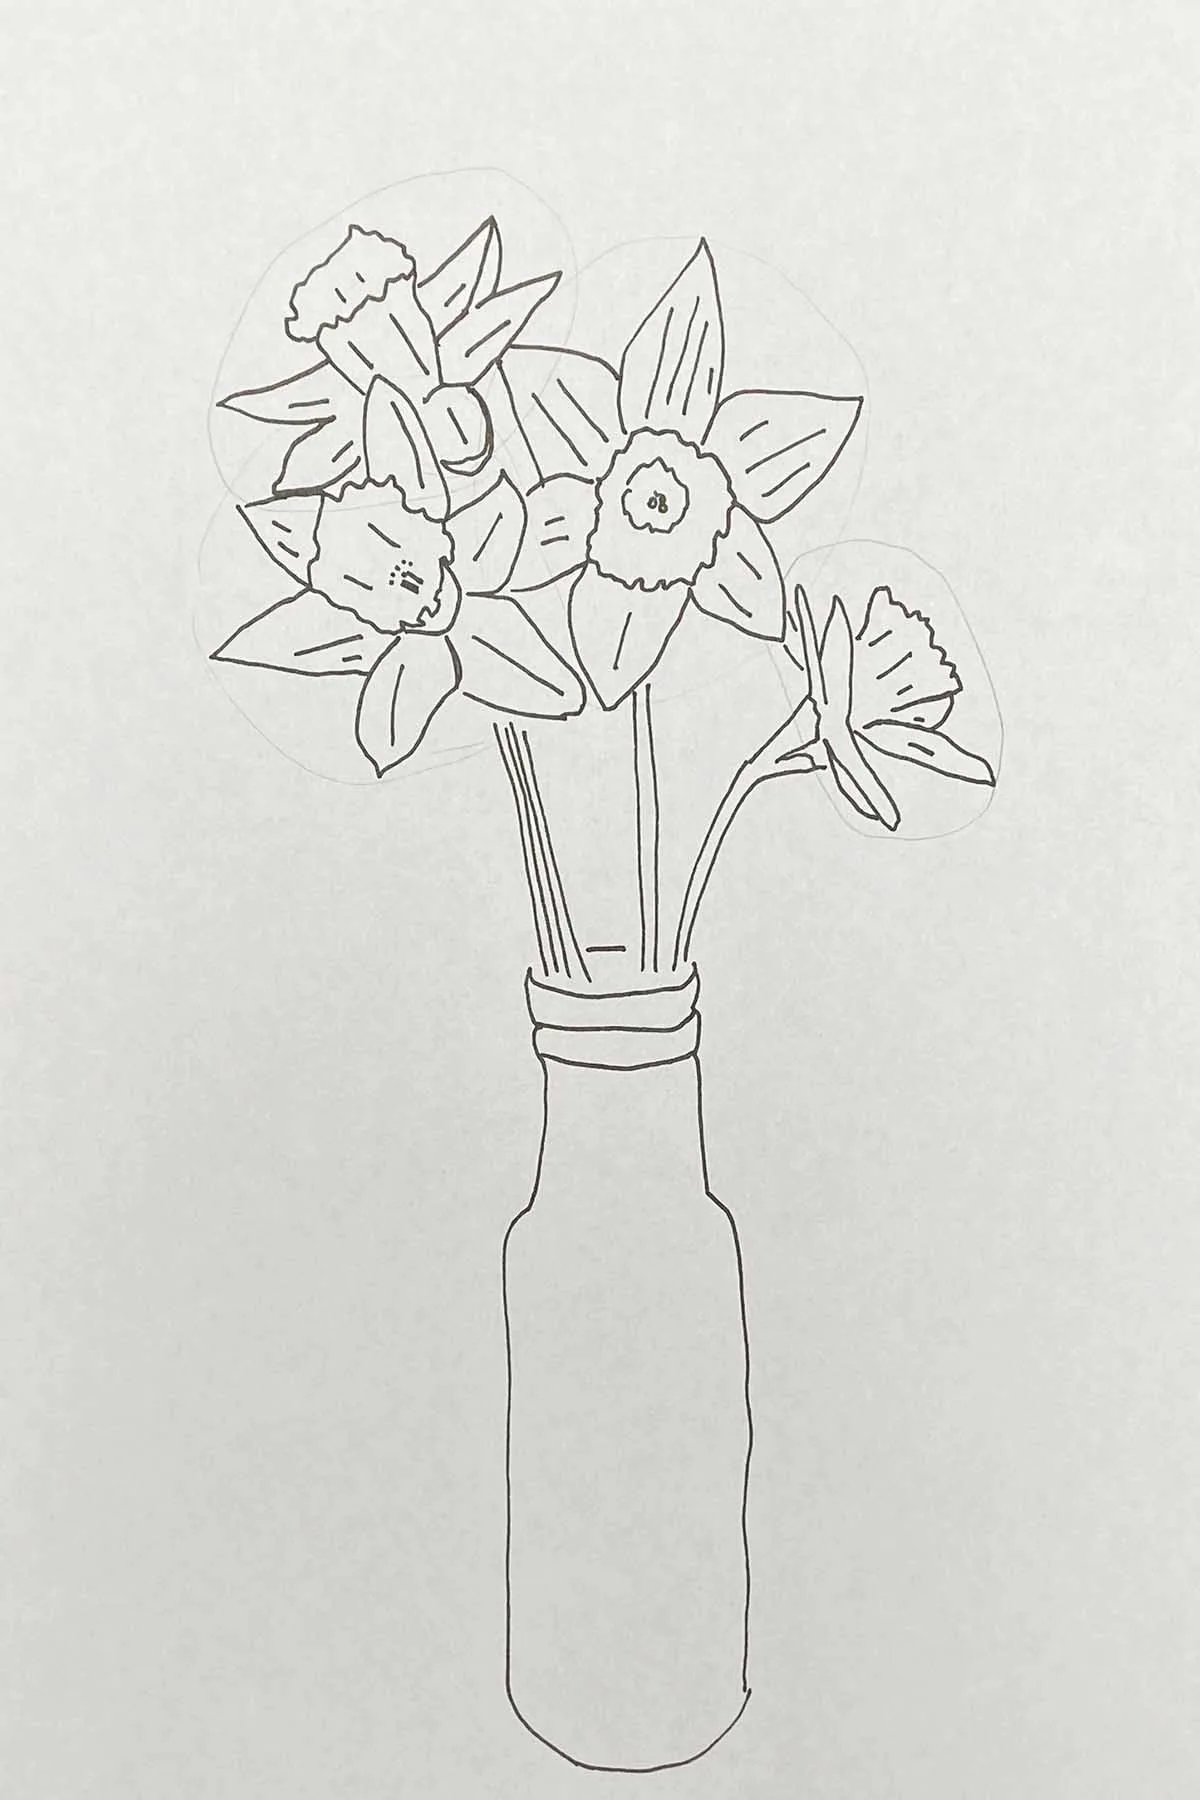 How to draw a bunch of daffodils in a vase adding the details